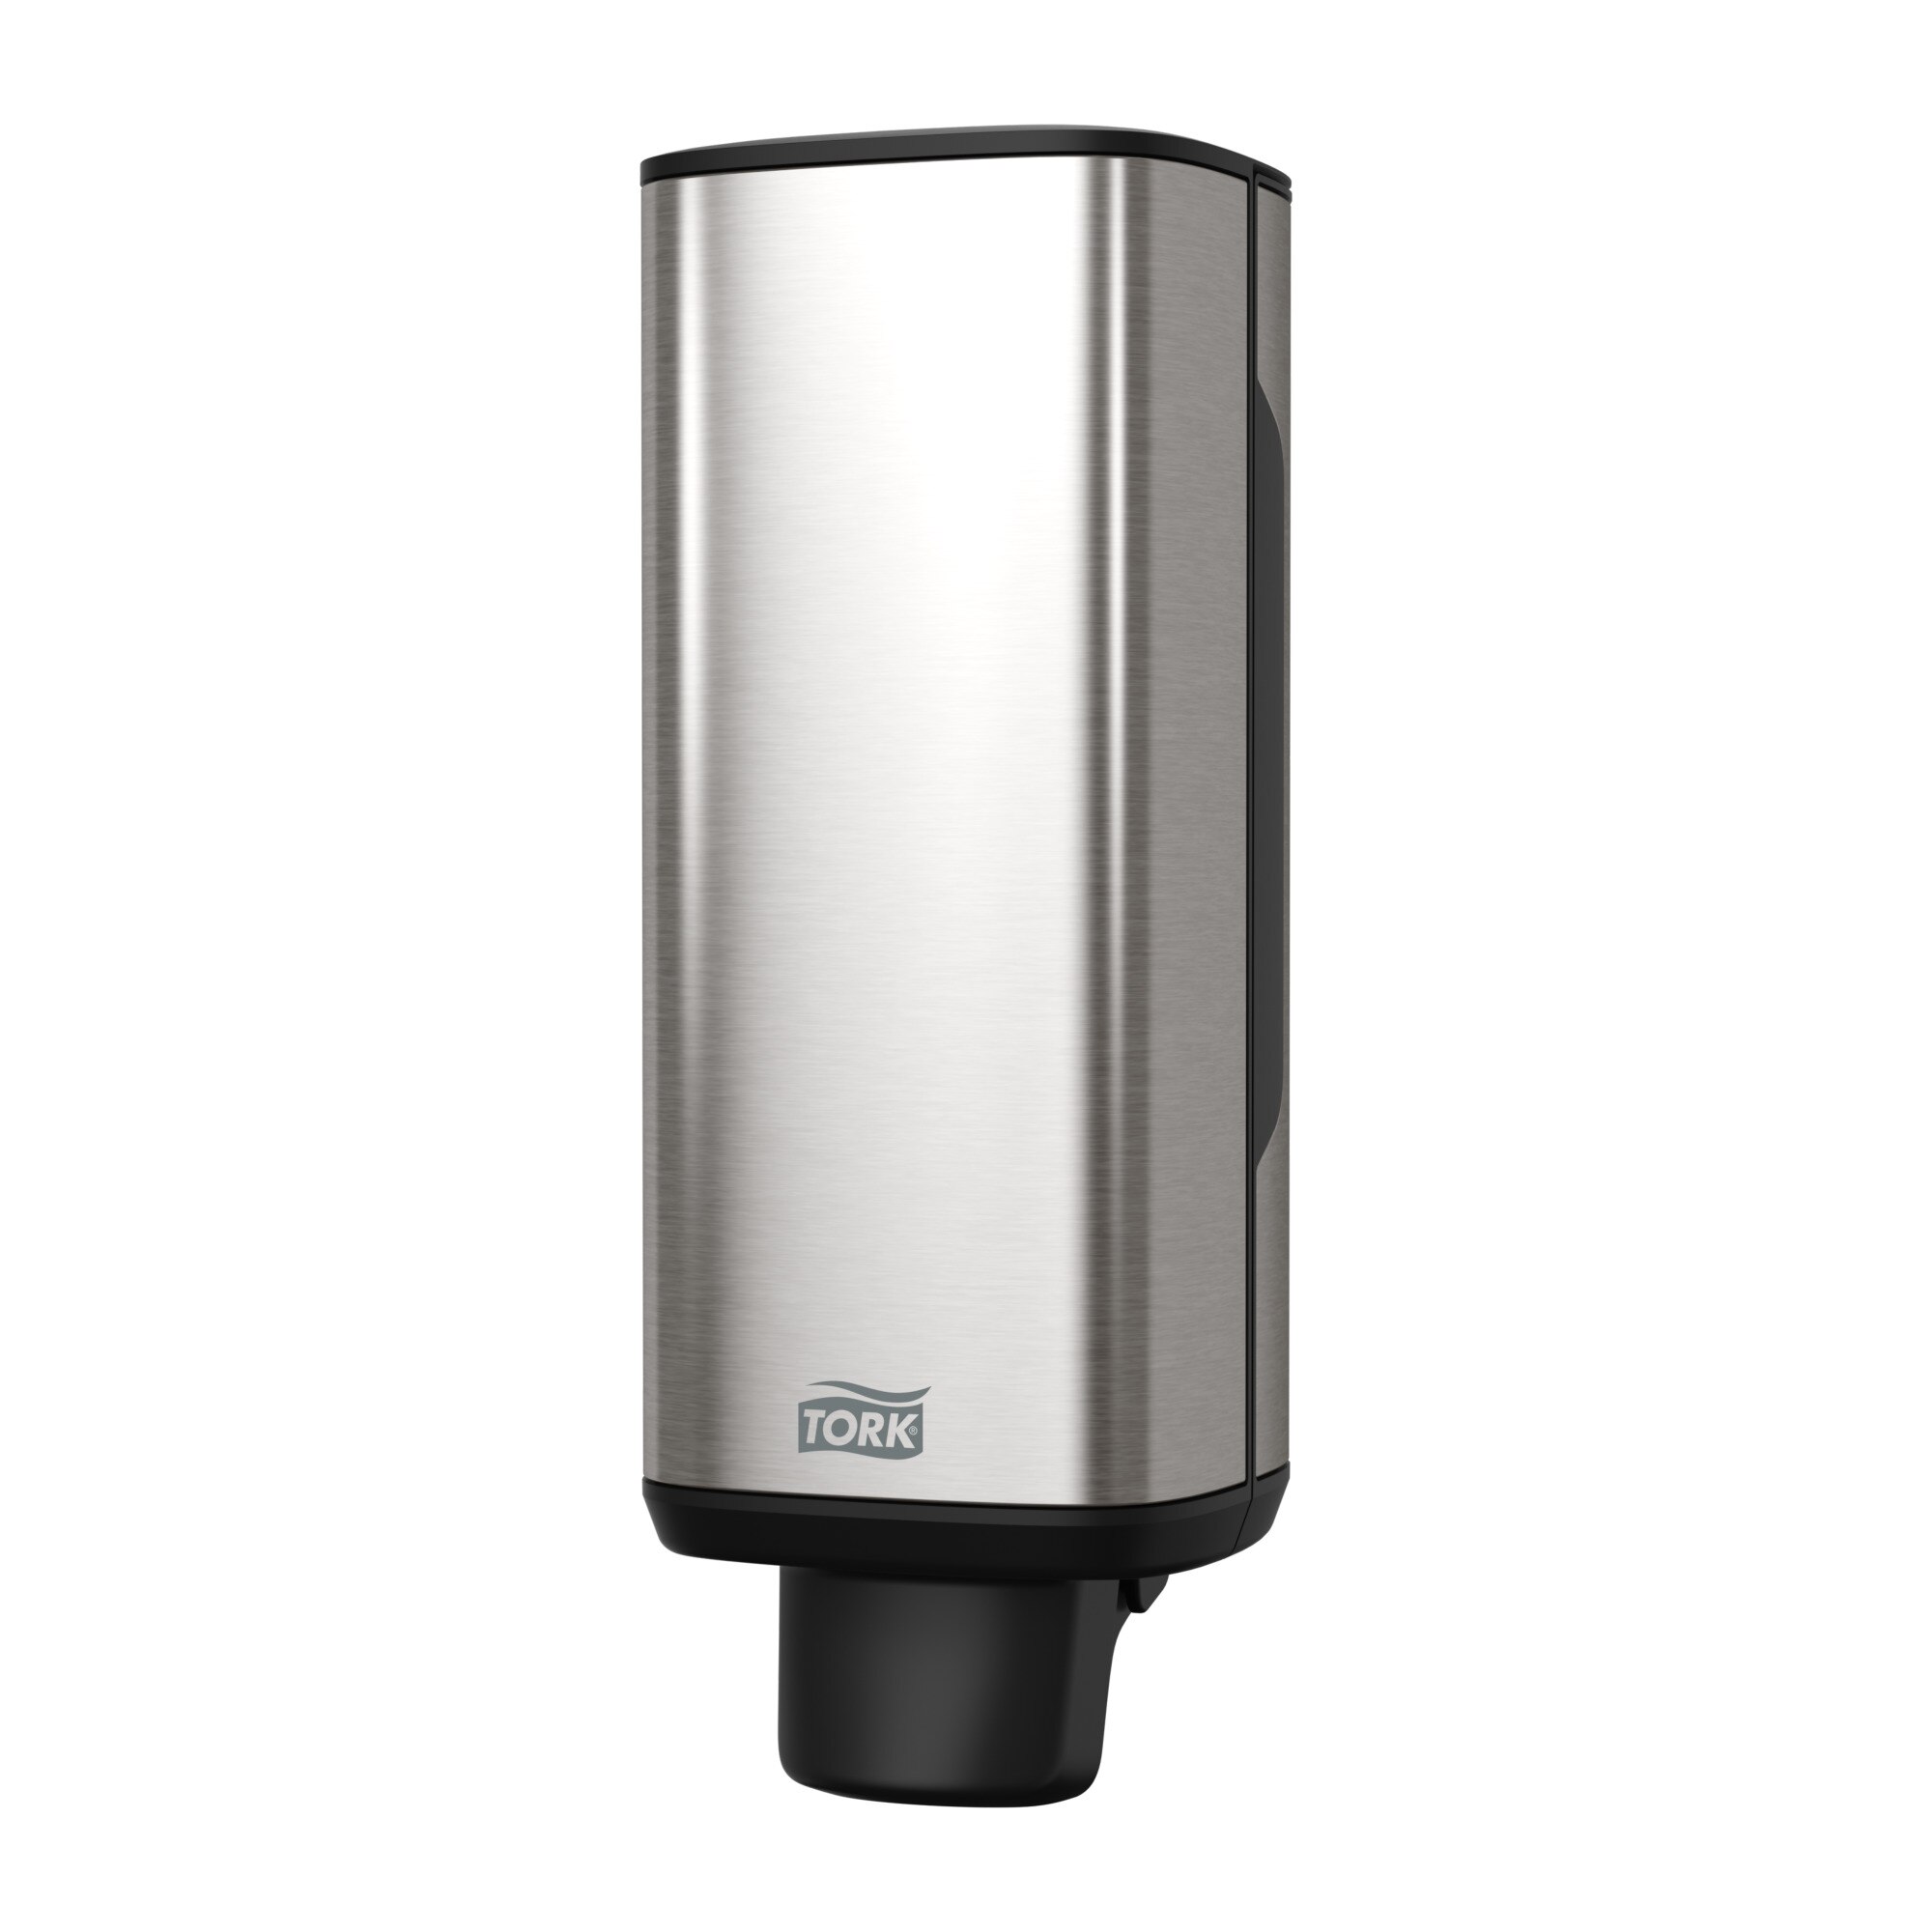 Tork Automatic Foam Soap Dispenser with Intuition sensor Stainless Steel 466100 